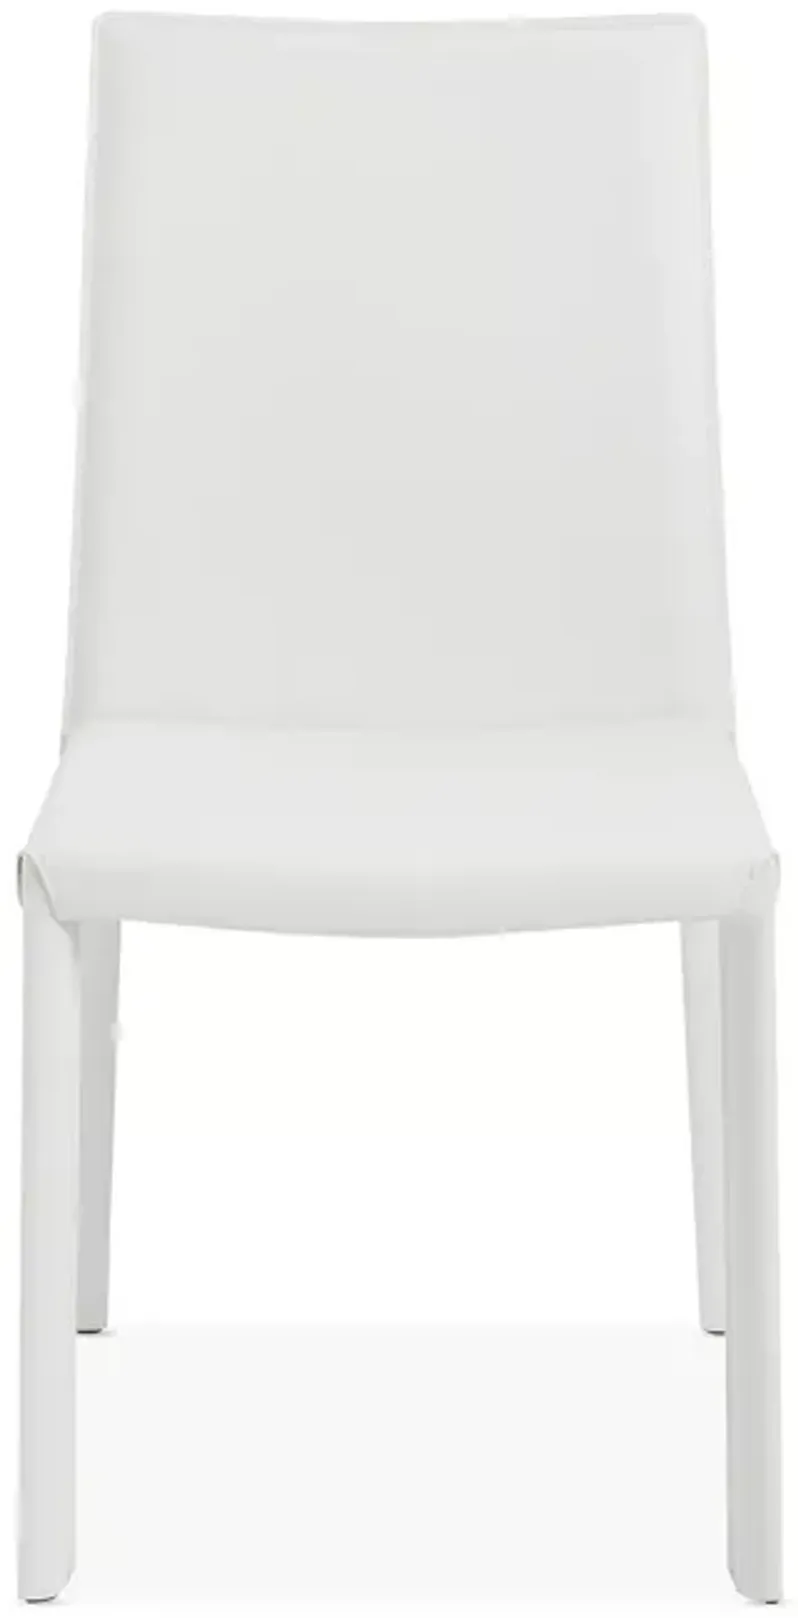 Euro Style Hasina Side Chairs, Set of 2